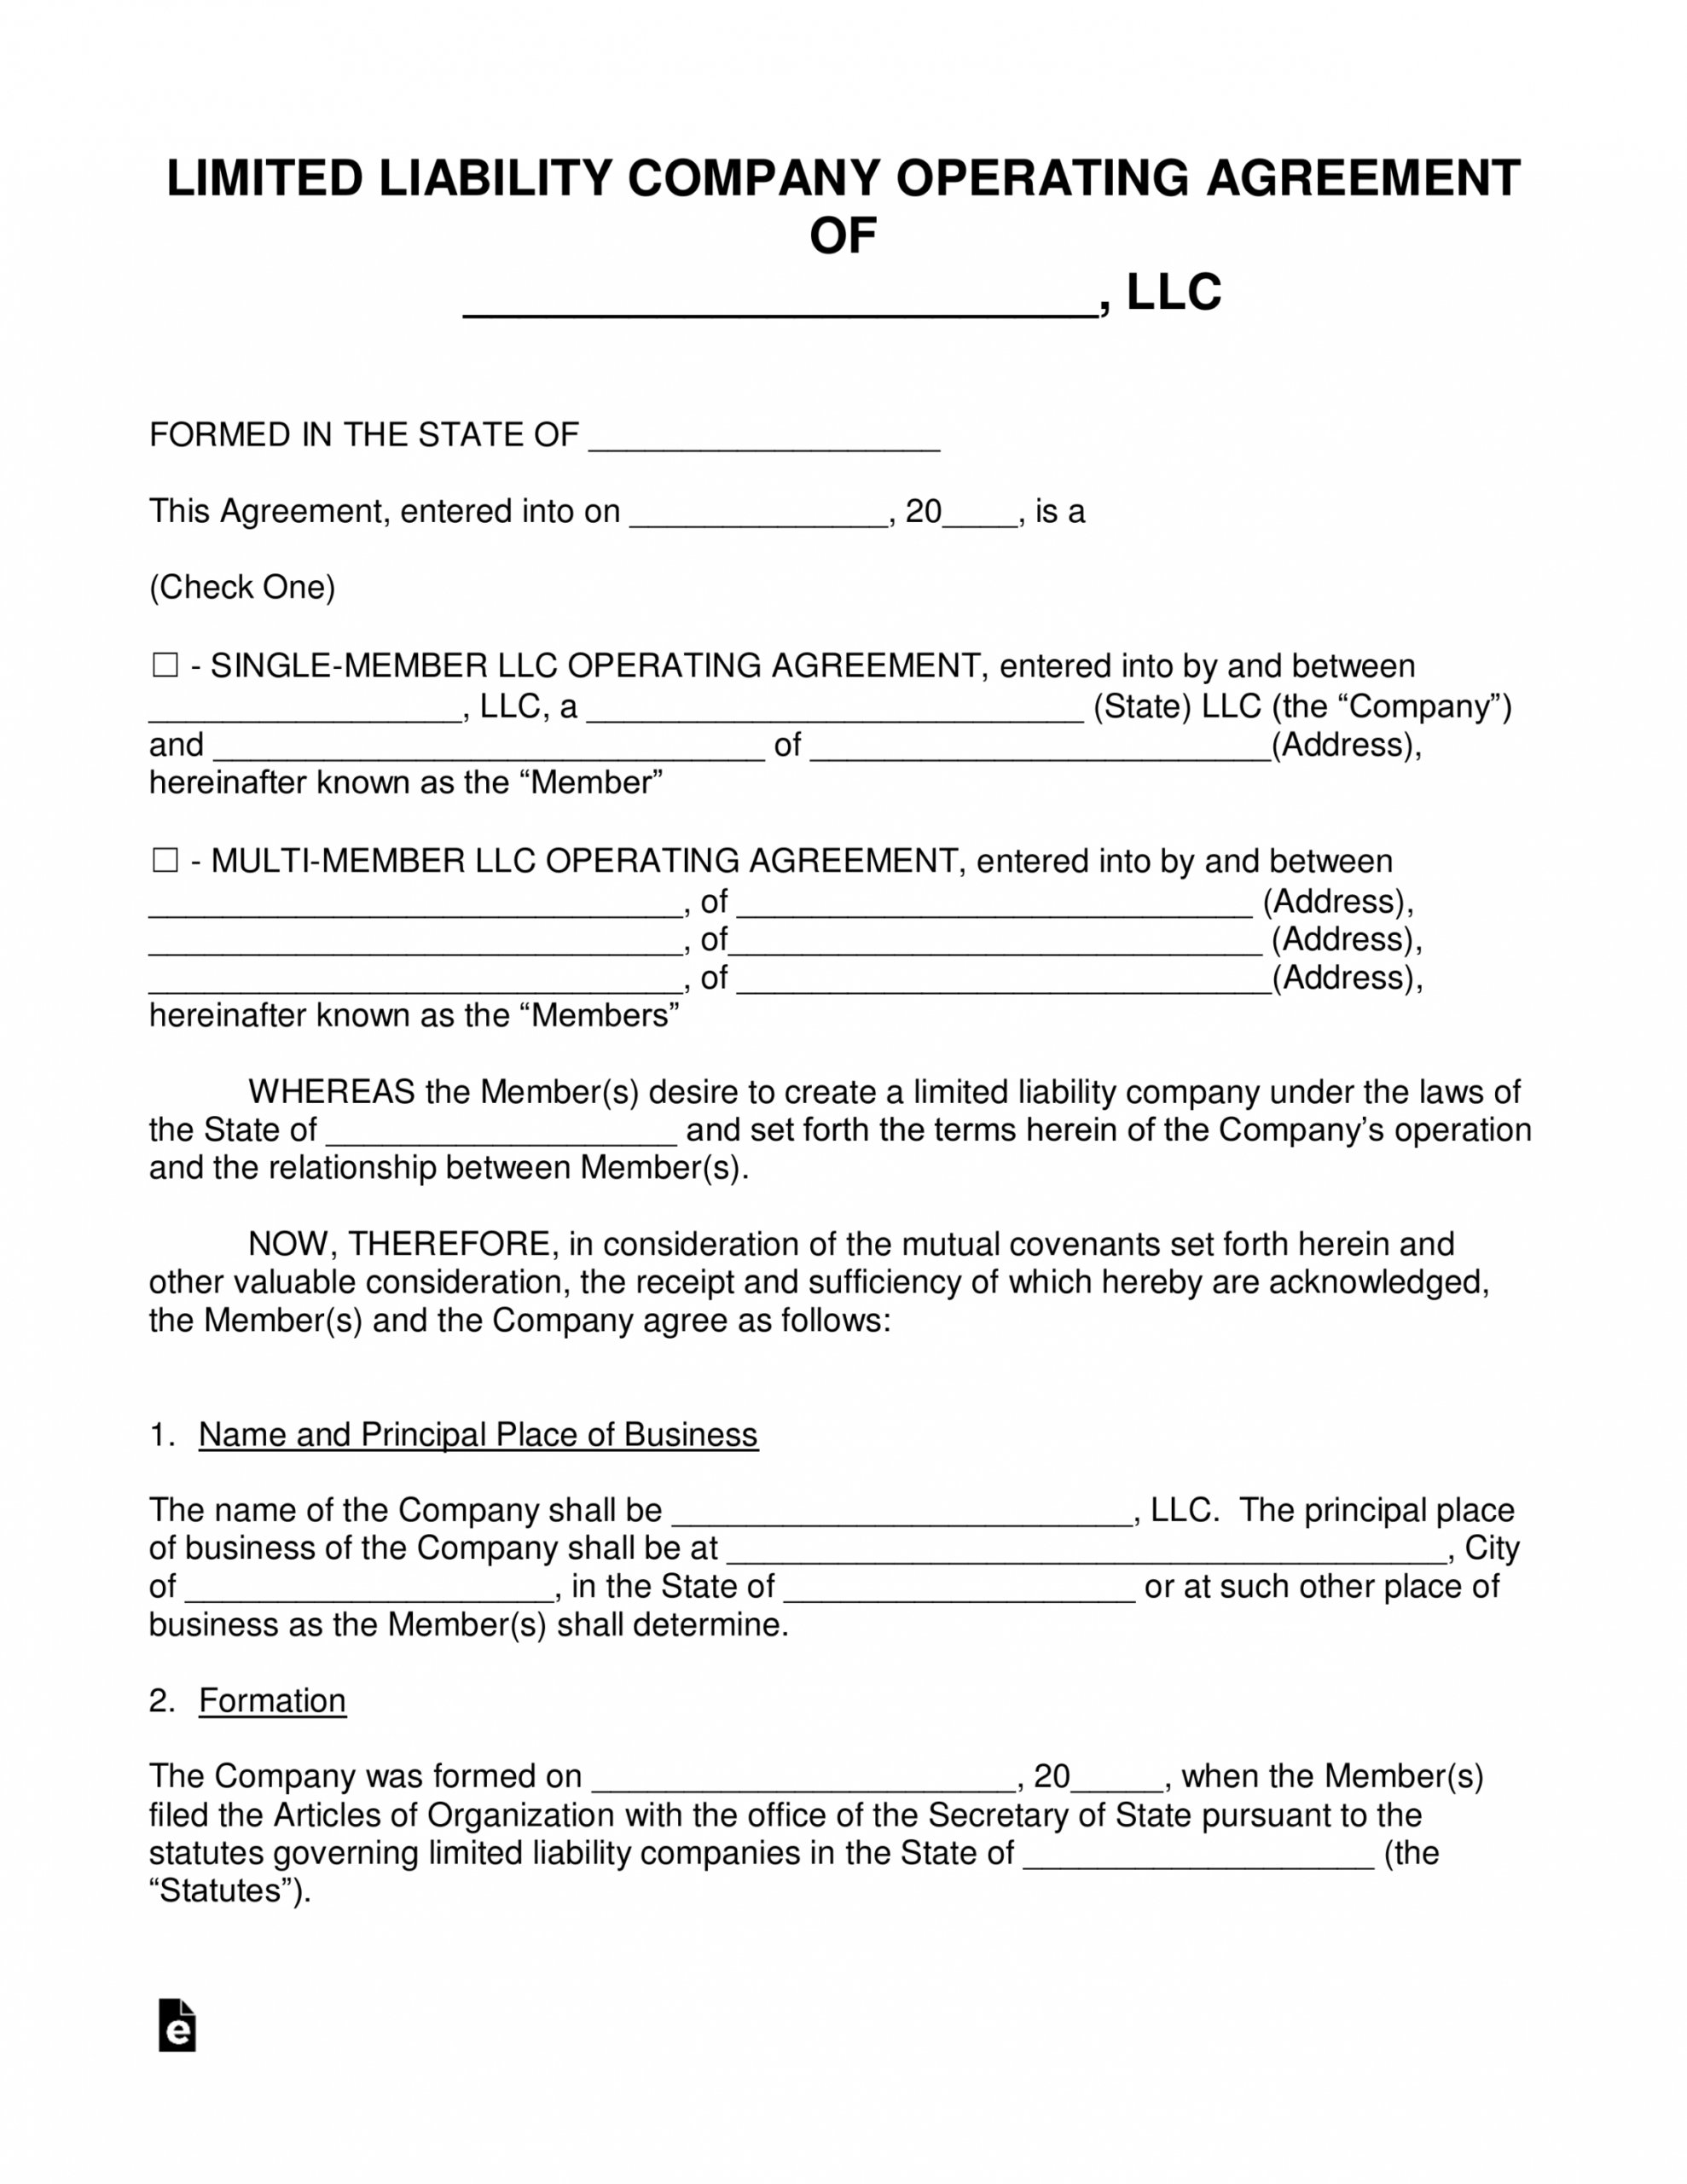 sample-free-llc-operating-agreement-templates-pdf-word-eforms-owner